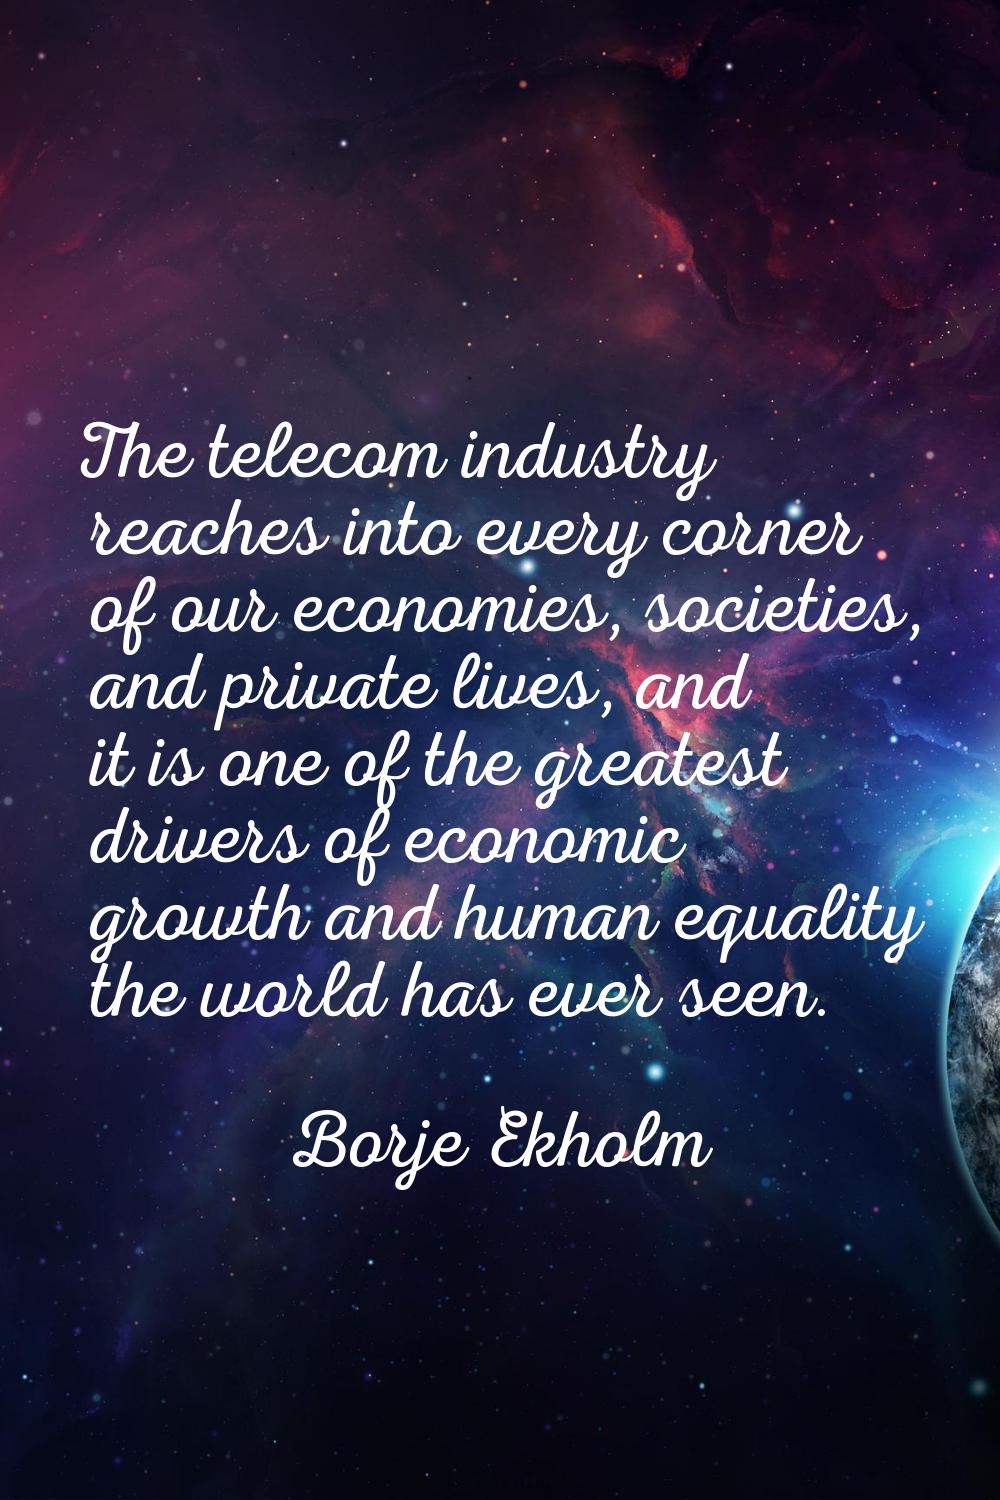 The telecom industry reaches into every corner of our economies, societies, and private lives, and 